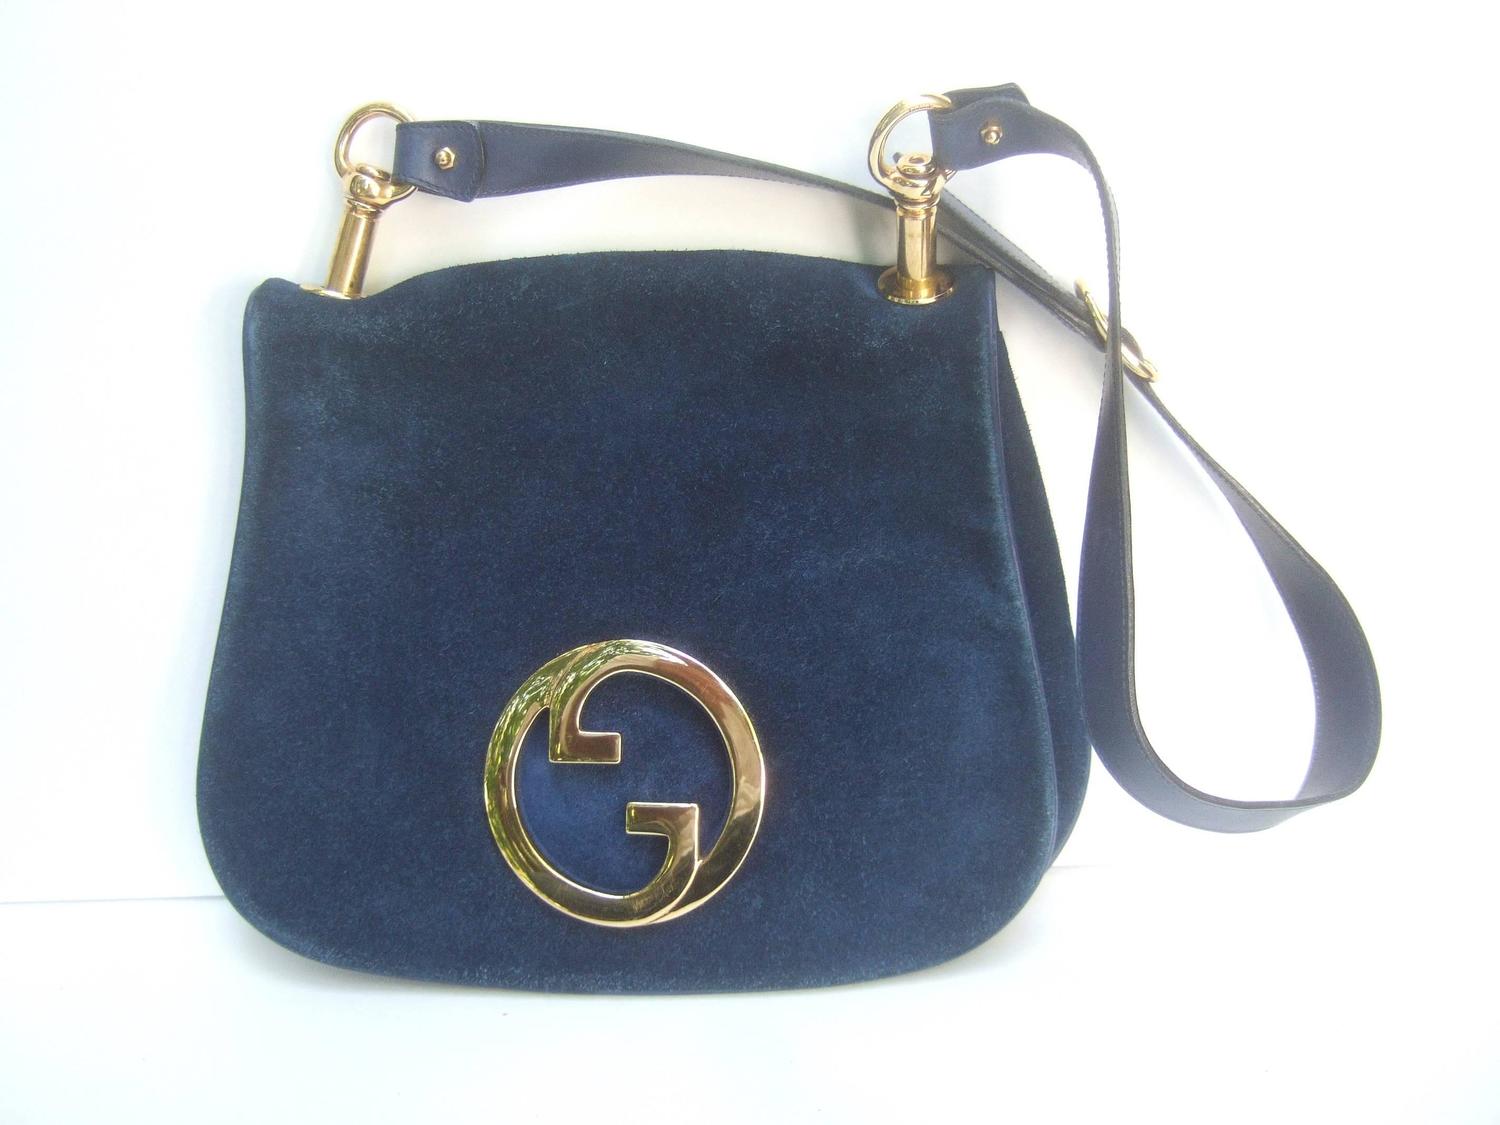 Gucci Italy Rare Midnight Blue Suede Shoulder Bag c 1970s at 1stdibs